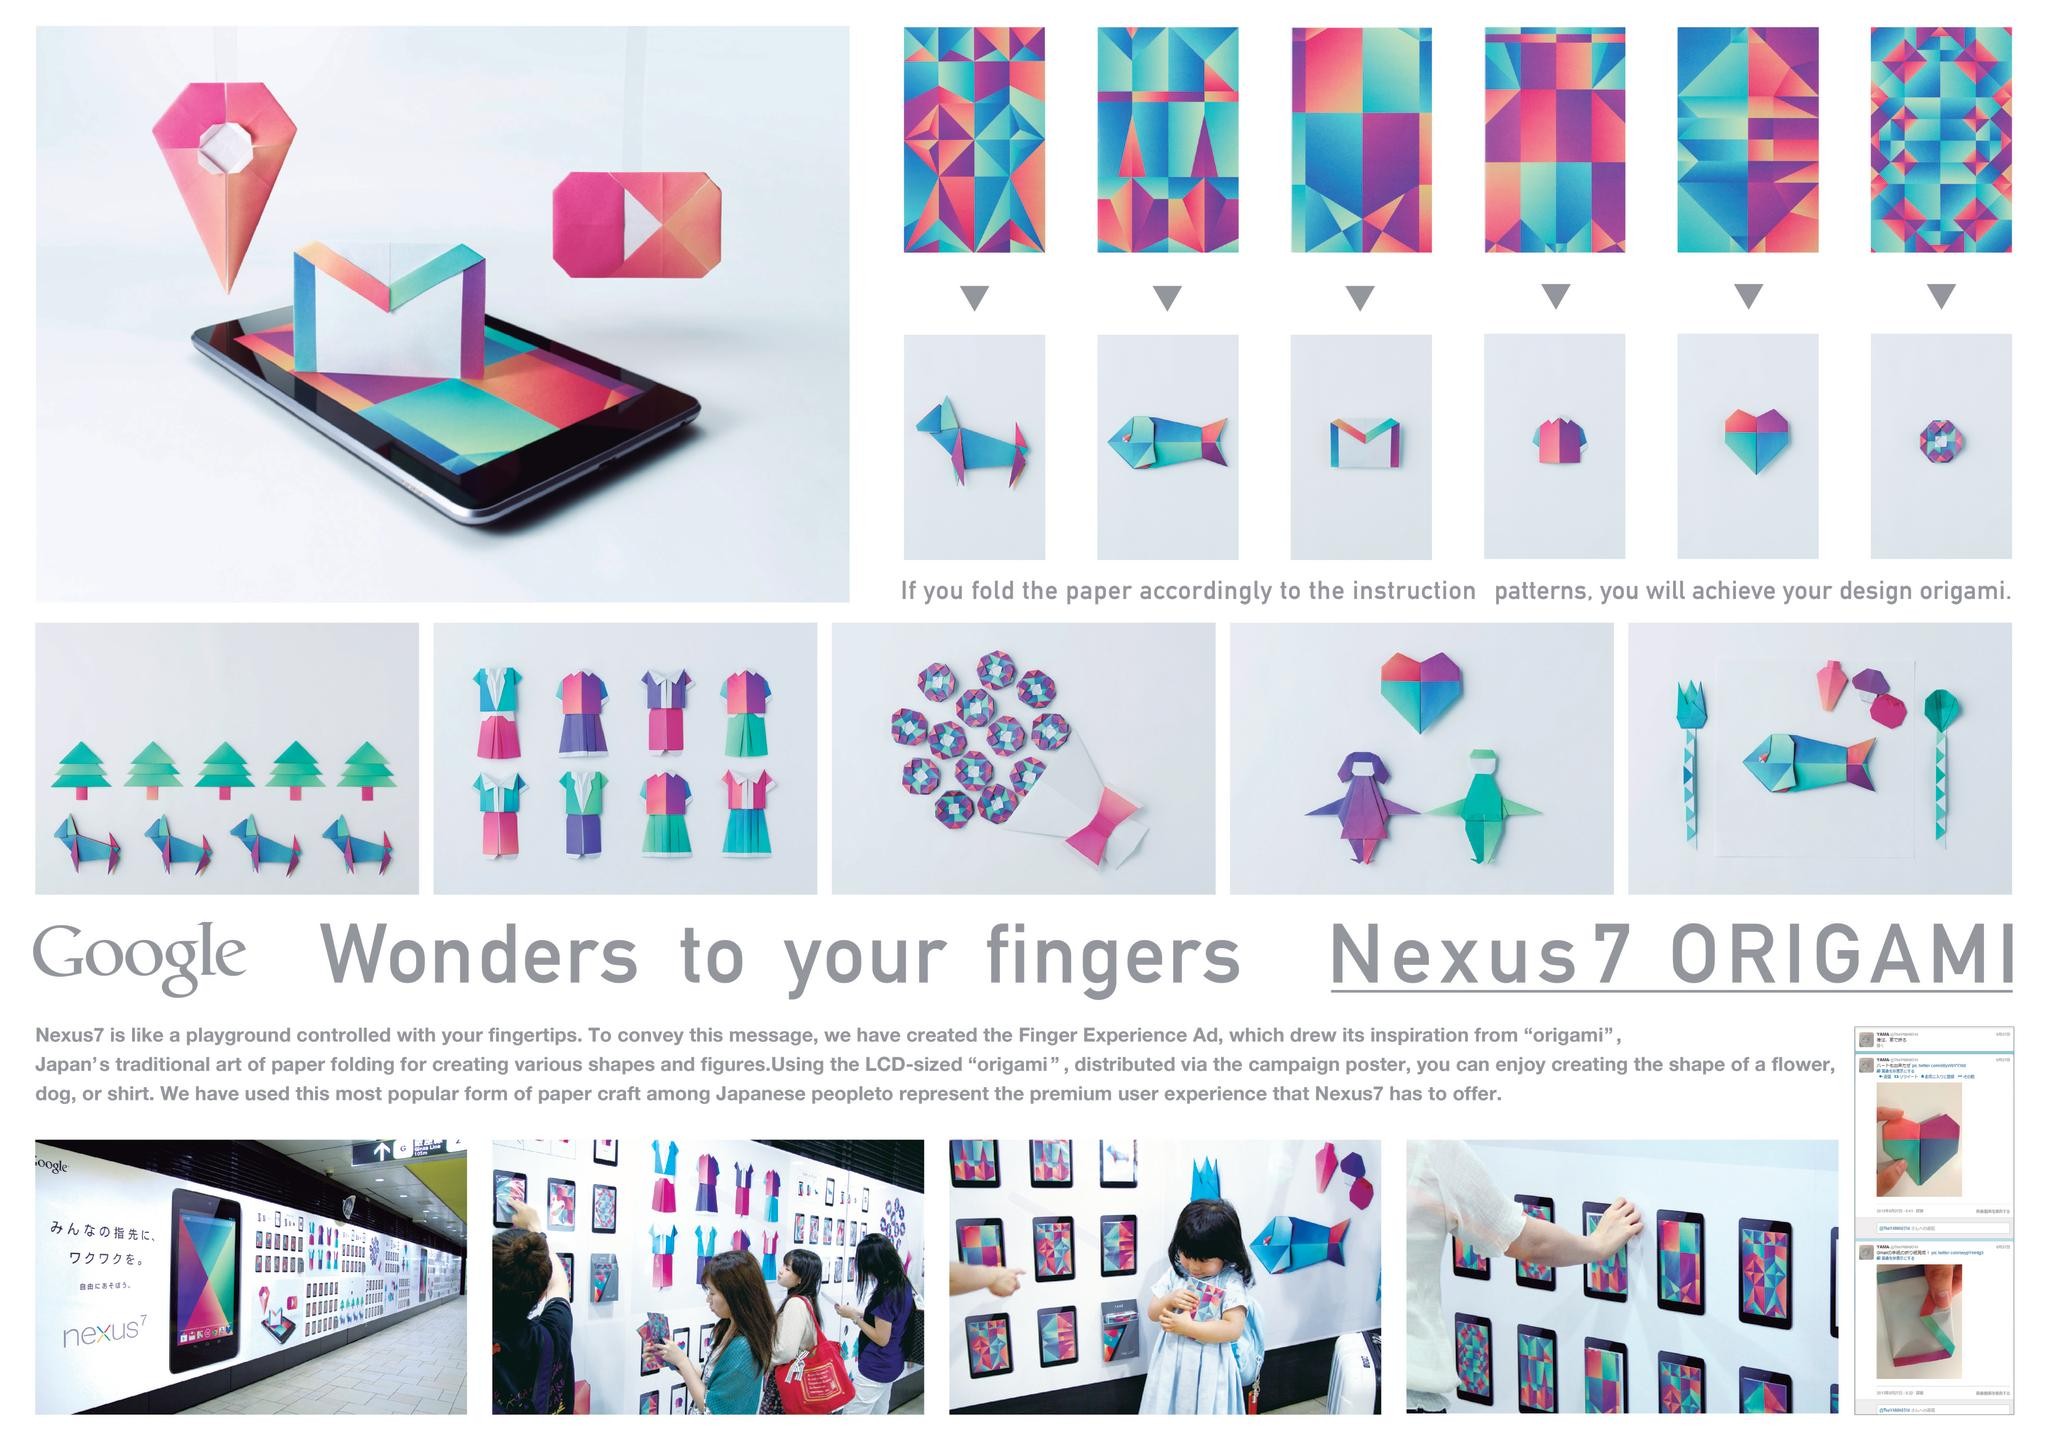 WONDERS TO YOUR FINGERS